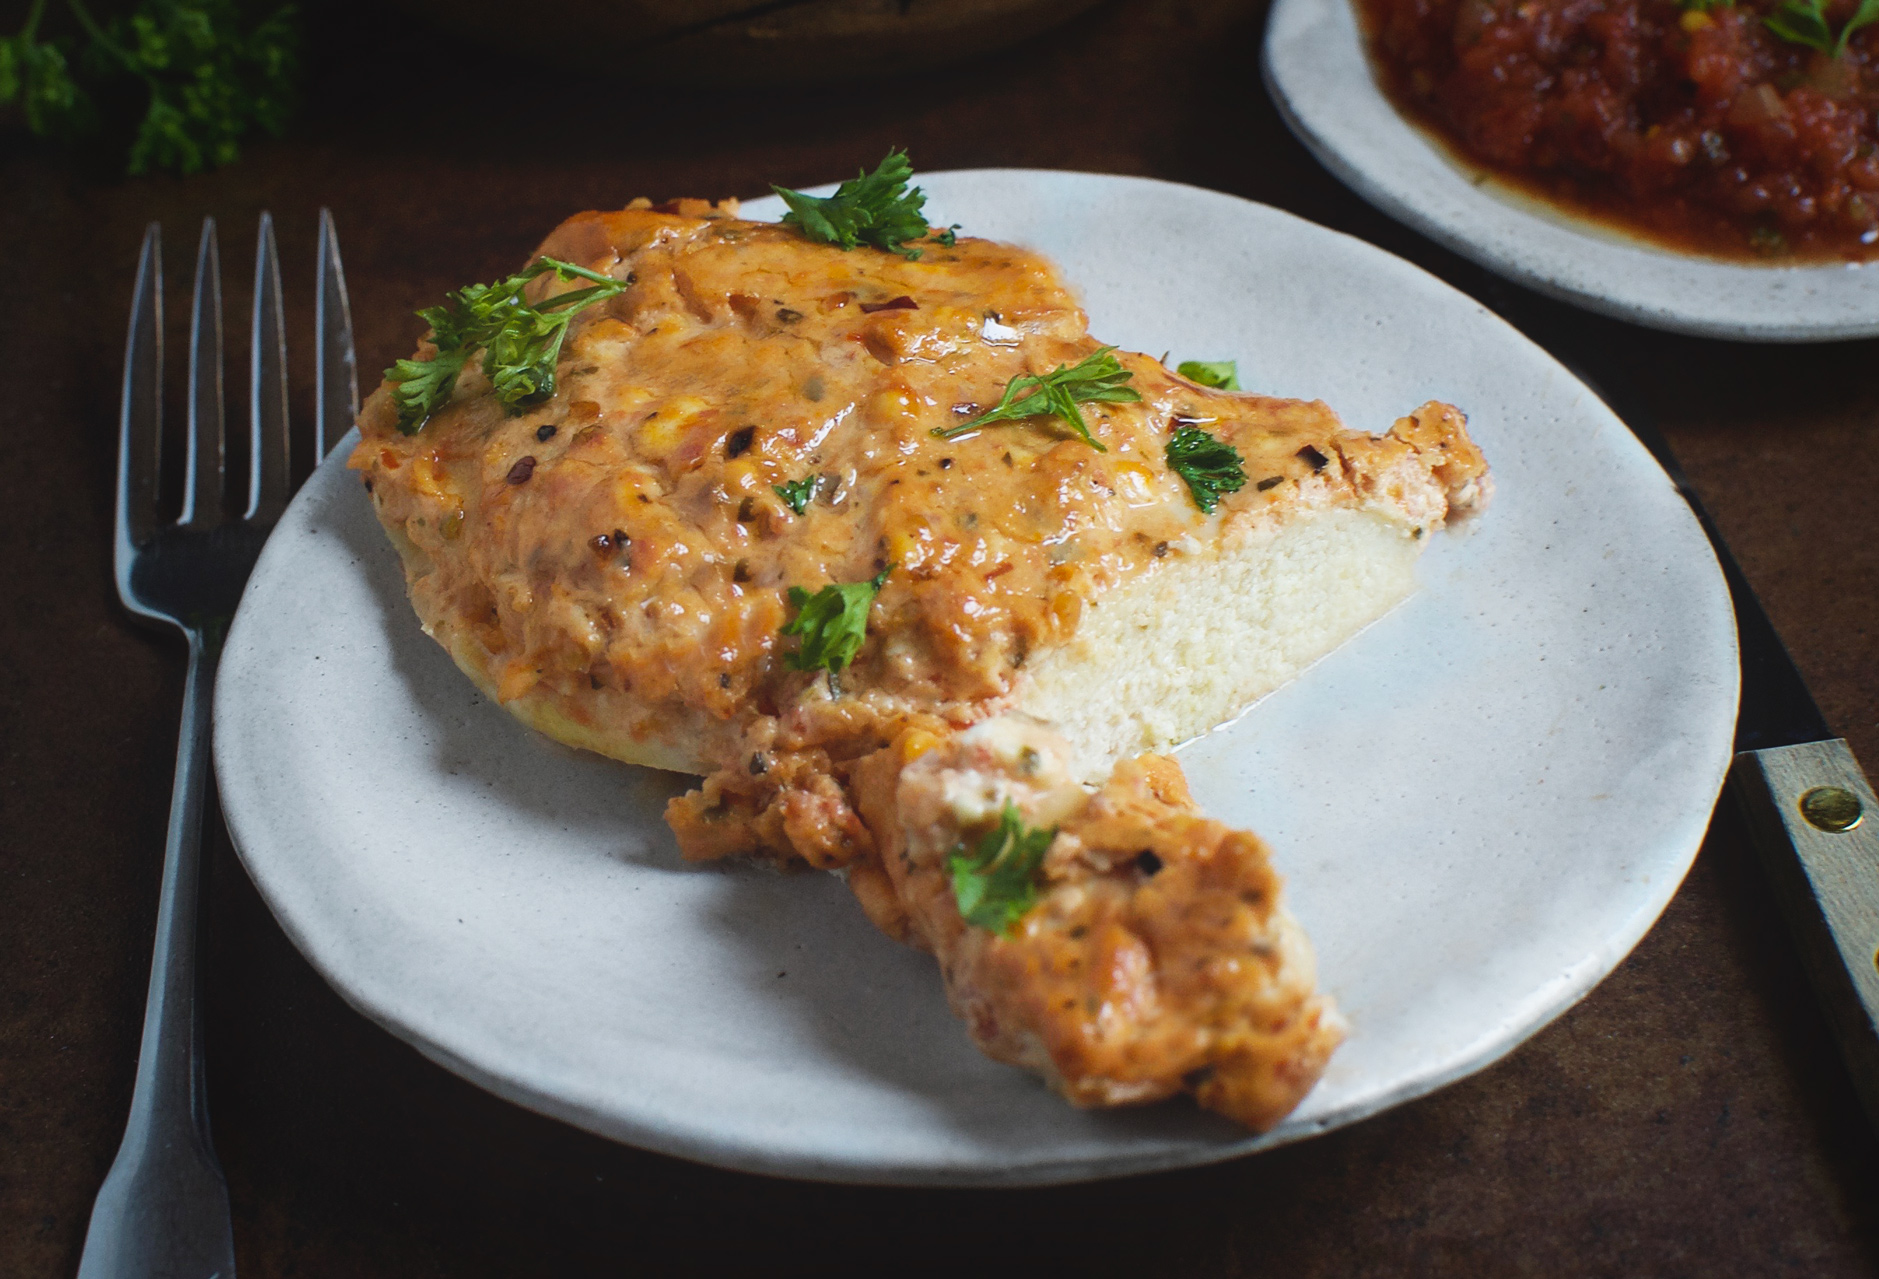 This Super Easy Spicy Baked Chicken recipe makes a delicious main course! This chicken dish has a creamy, but spicy sauce that can be enjoyed by people on low-carb, ketogenic, lc/hf, Atkins, diabetic, gluten-free, grain free, and Banting diets. 